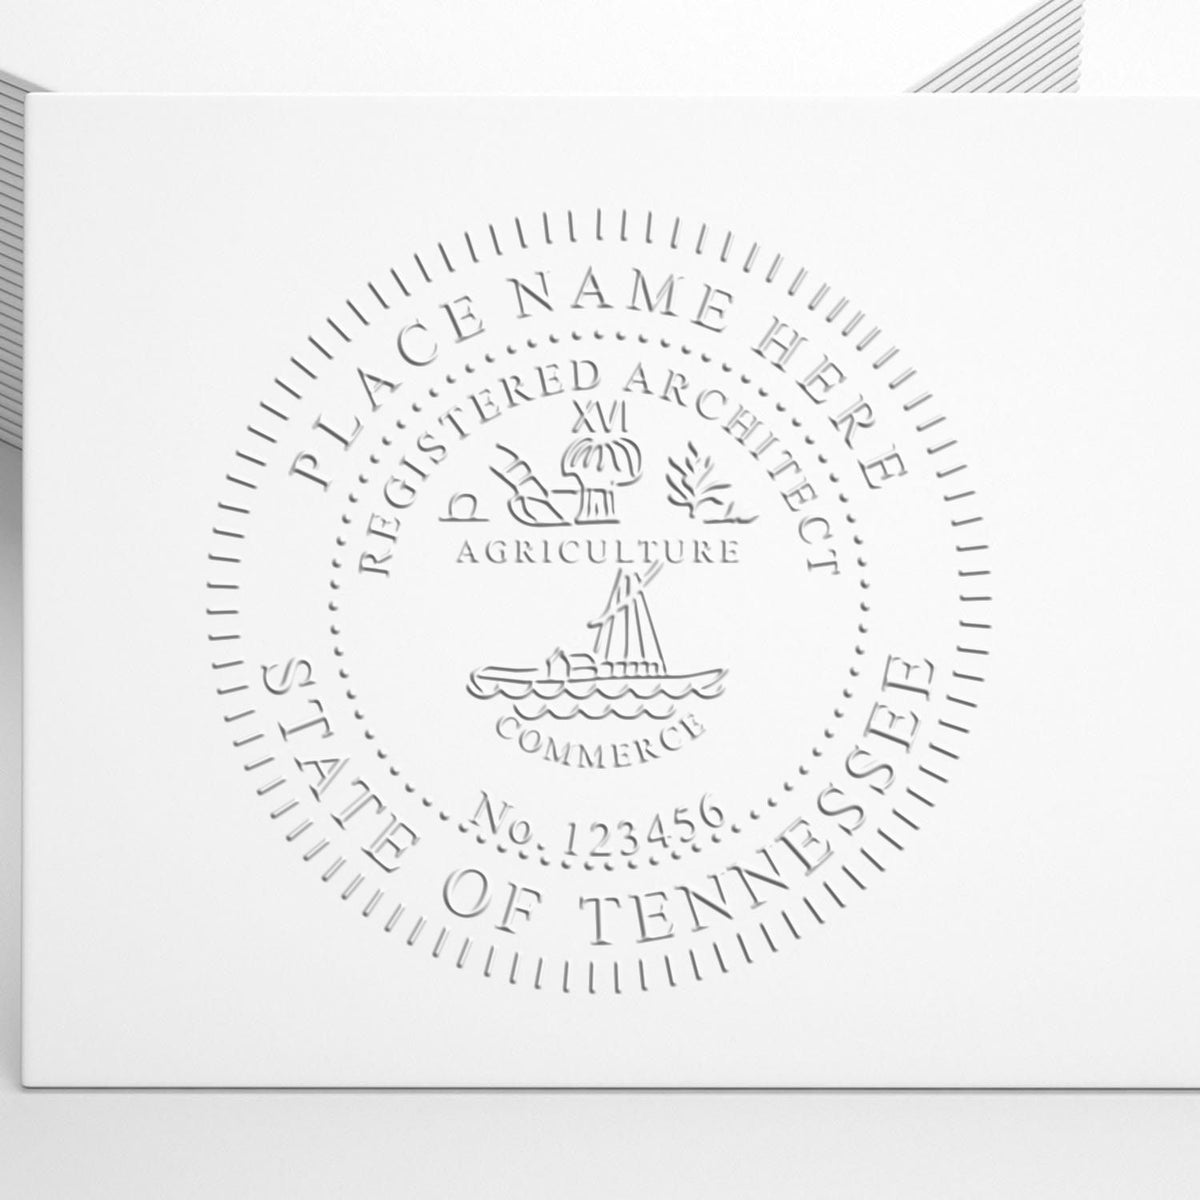 A stamped impression of the Tennessee Desk Architect Embossing Seal in this stylish lifestyle photo, setting the tone for a unique and personalized product.